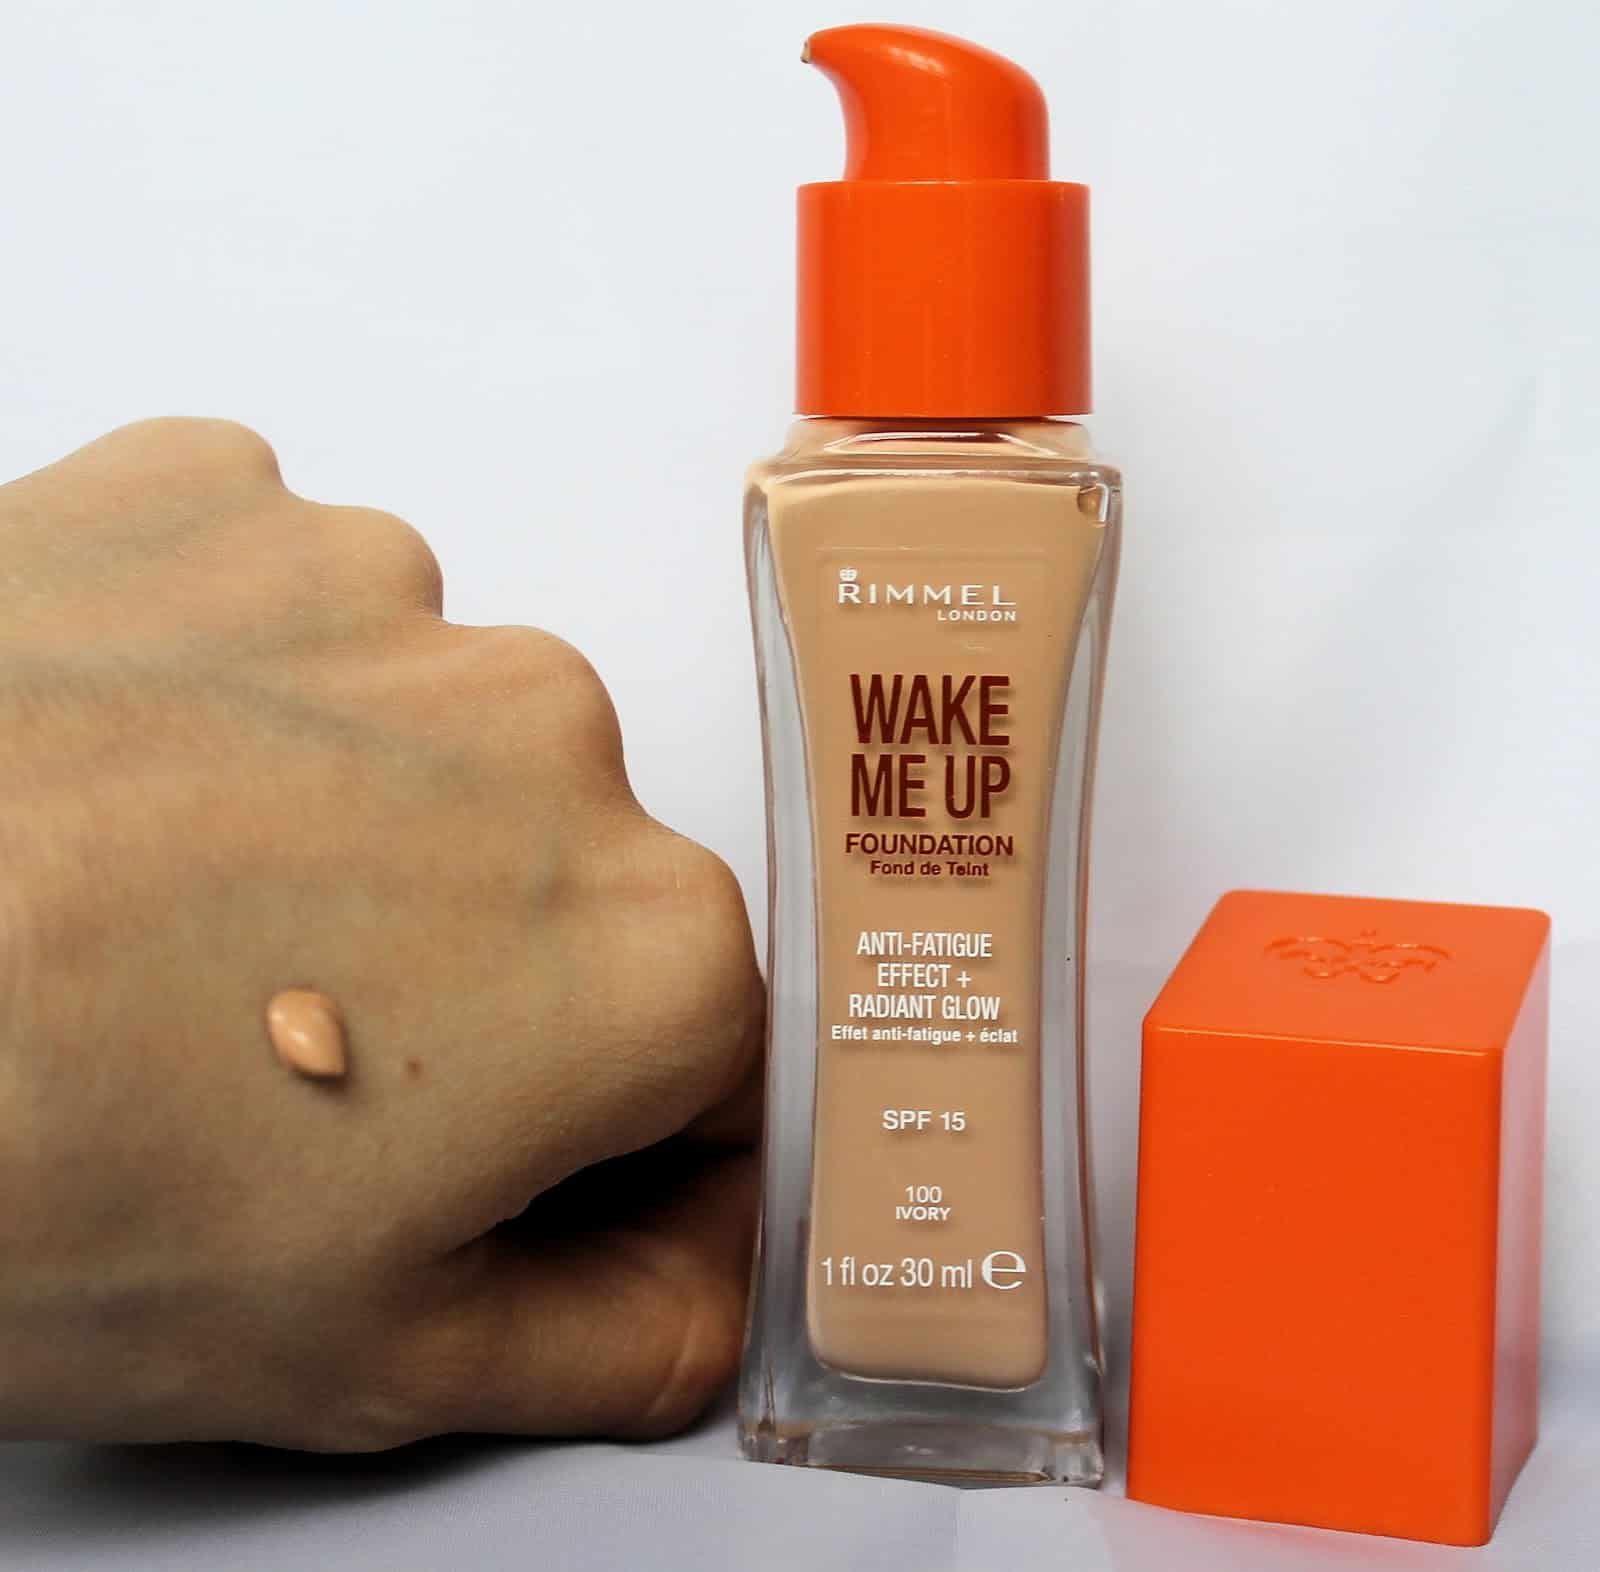 ItalianStrawHat: Top 3 Drugstore Foundations for Dry Skin